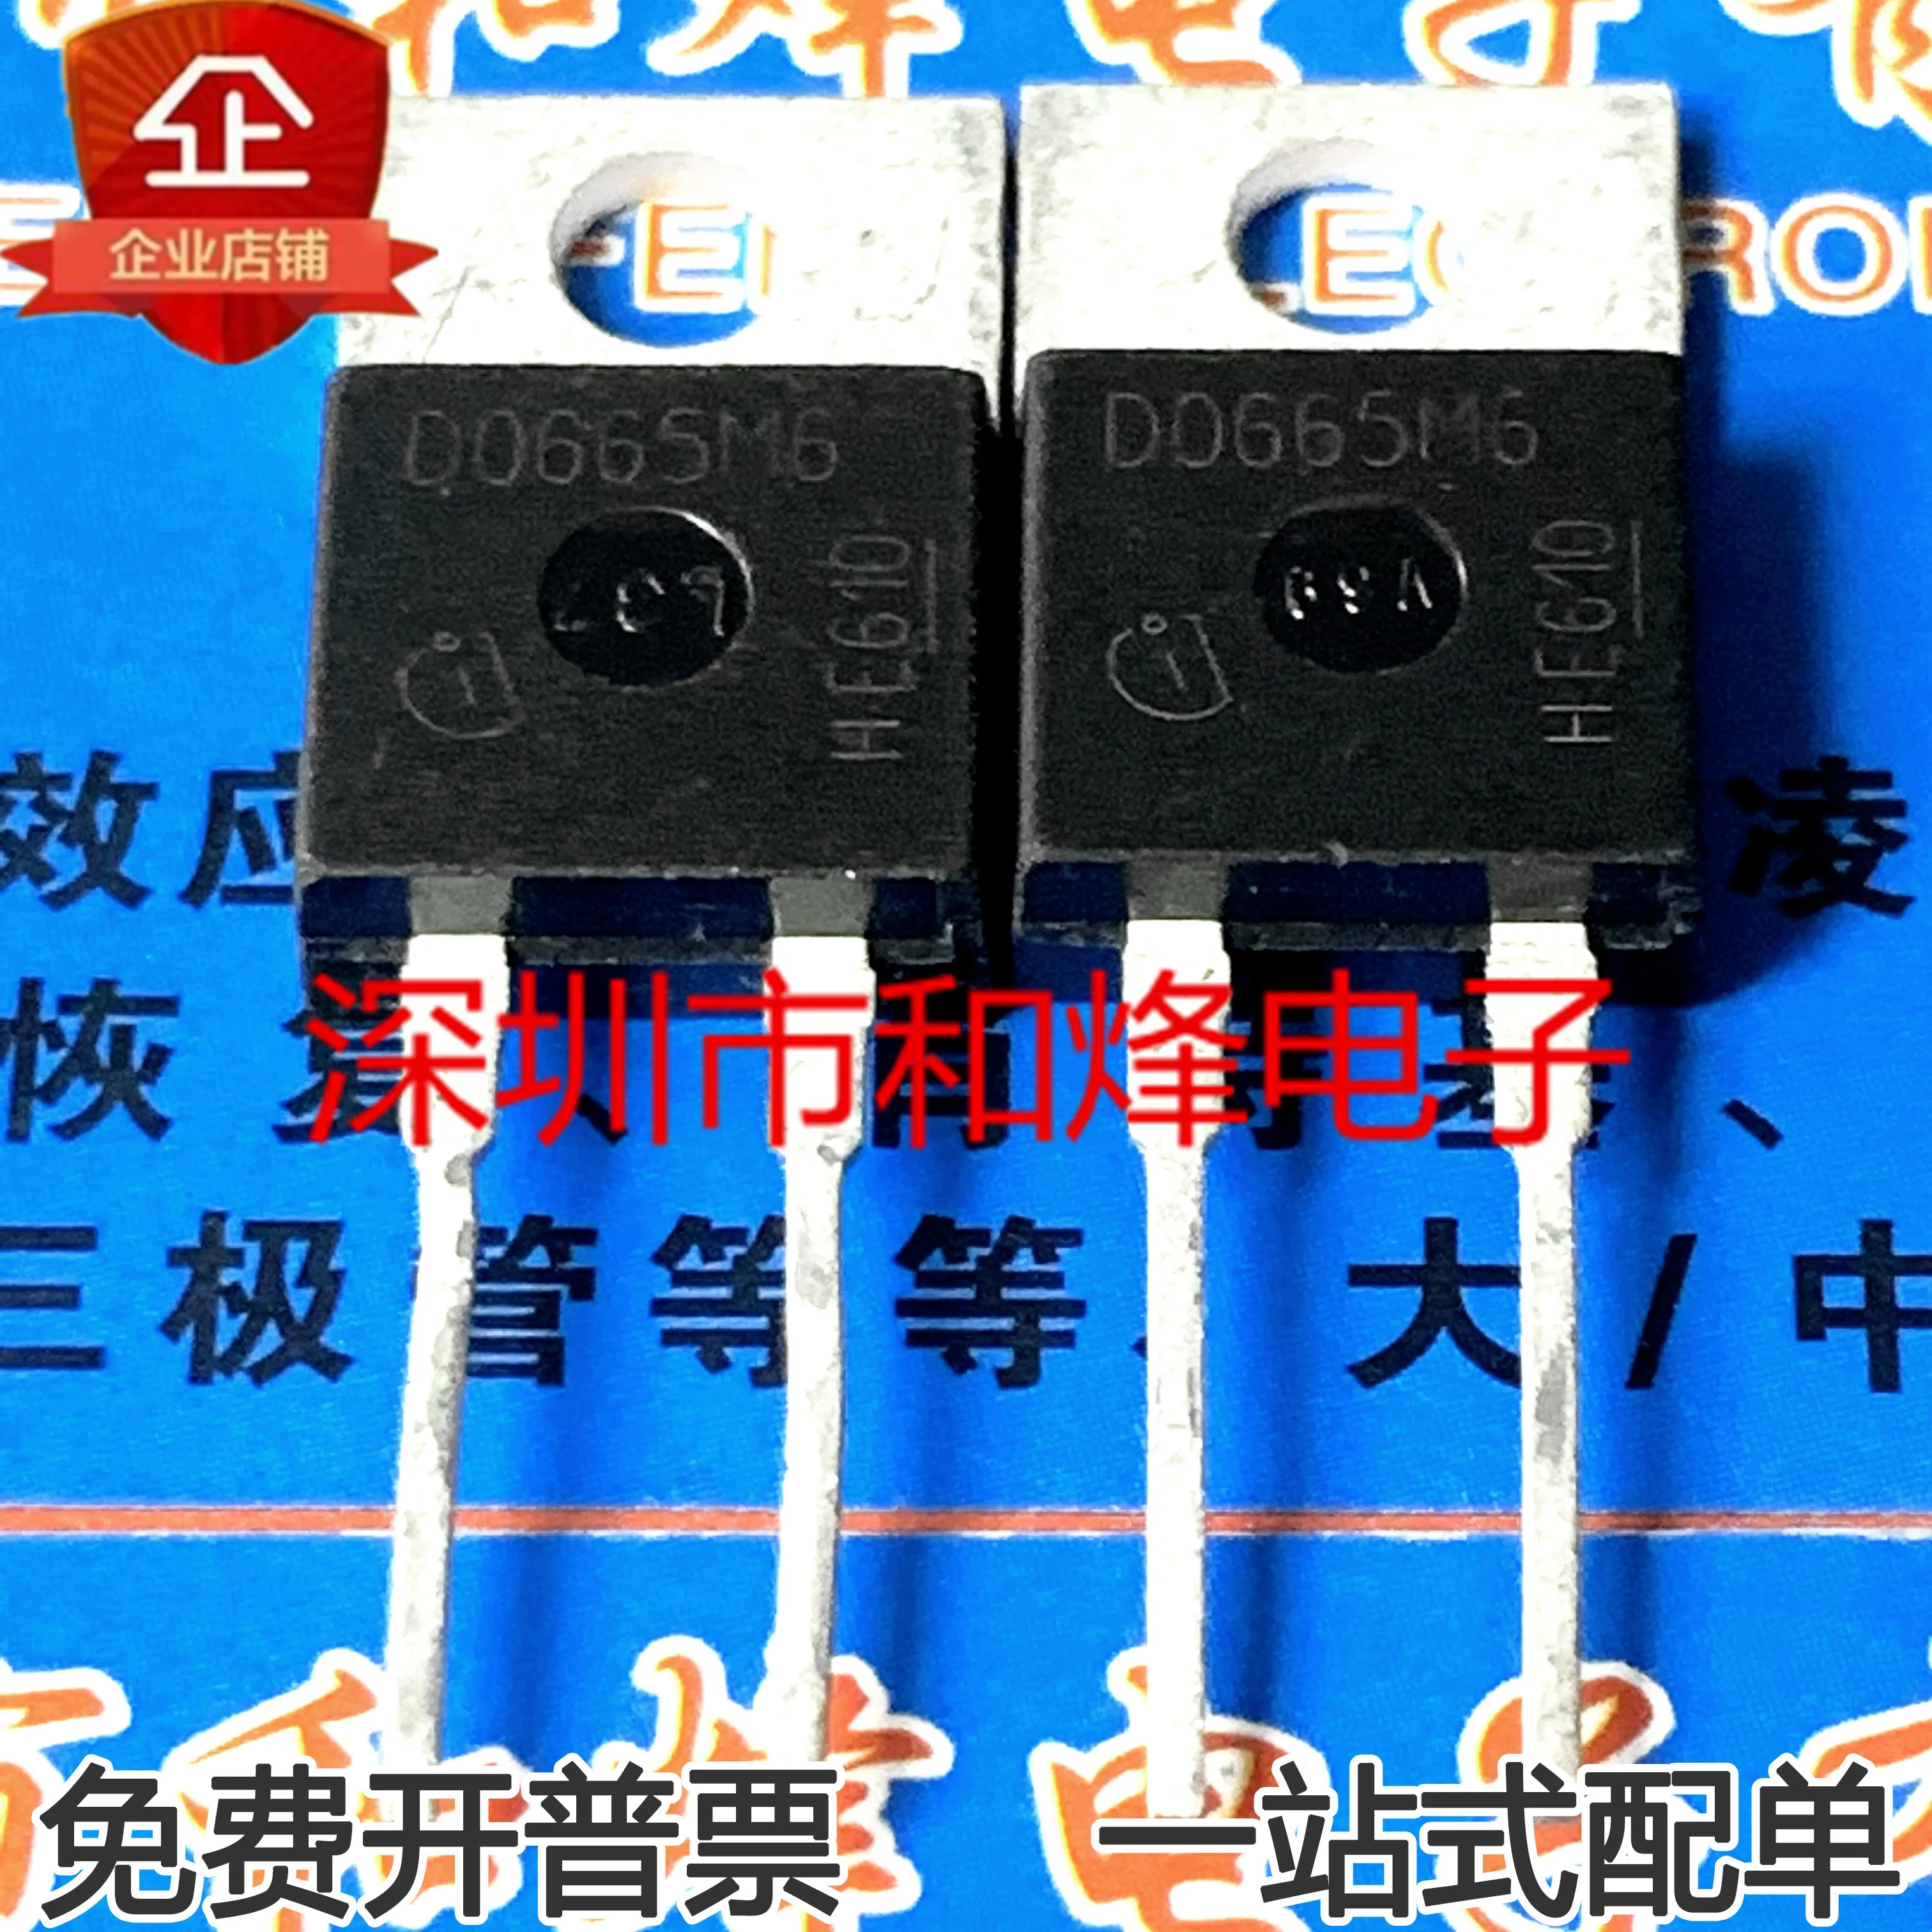 

10pcs 100% orginal new D0665M6 MOS field effect transistor commonly used power transistor TO220 quality assurance